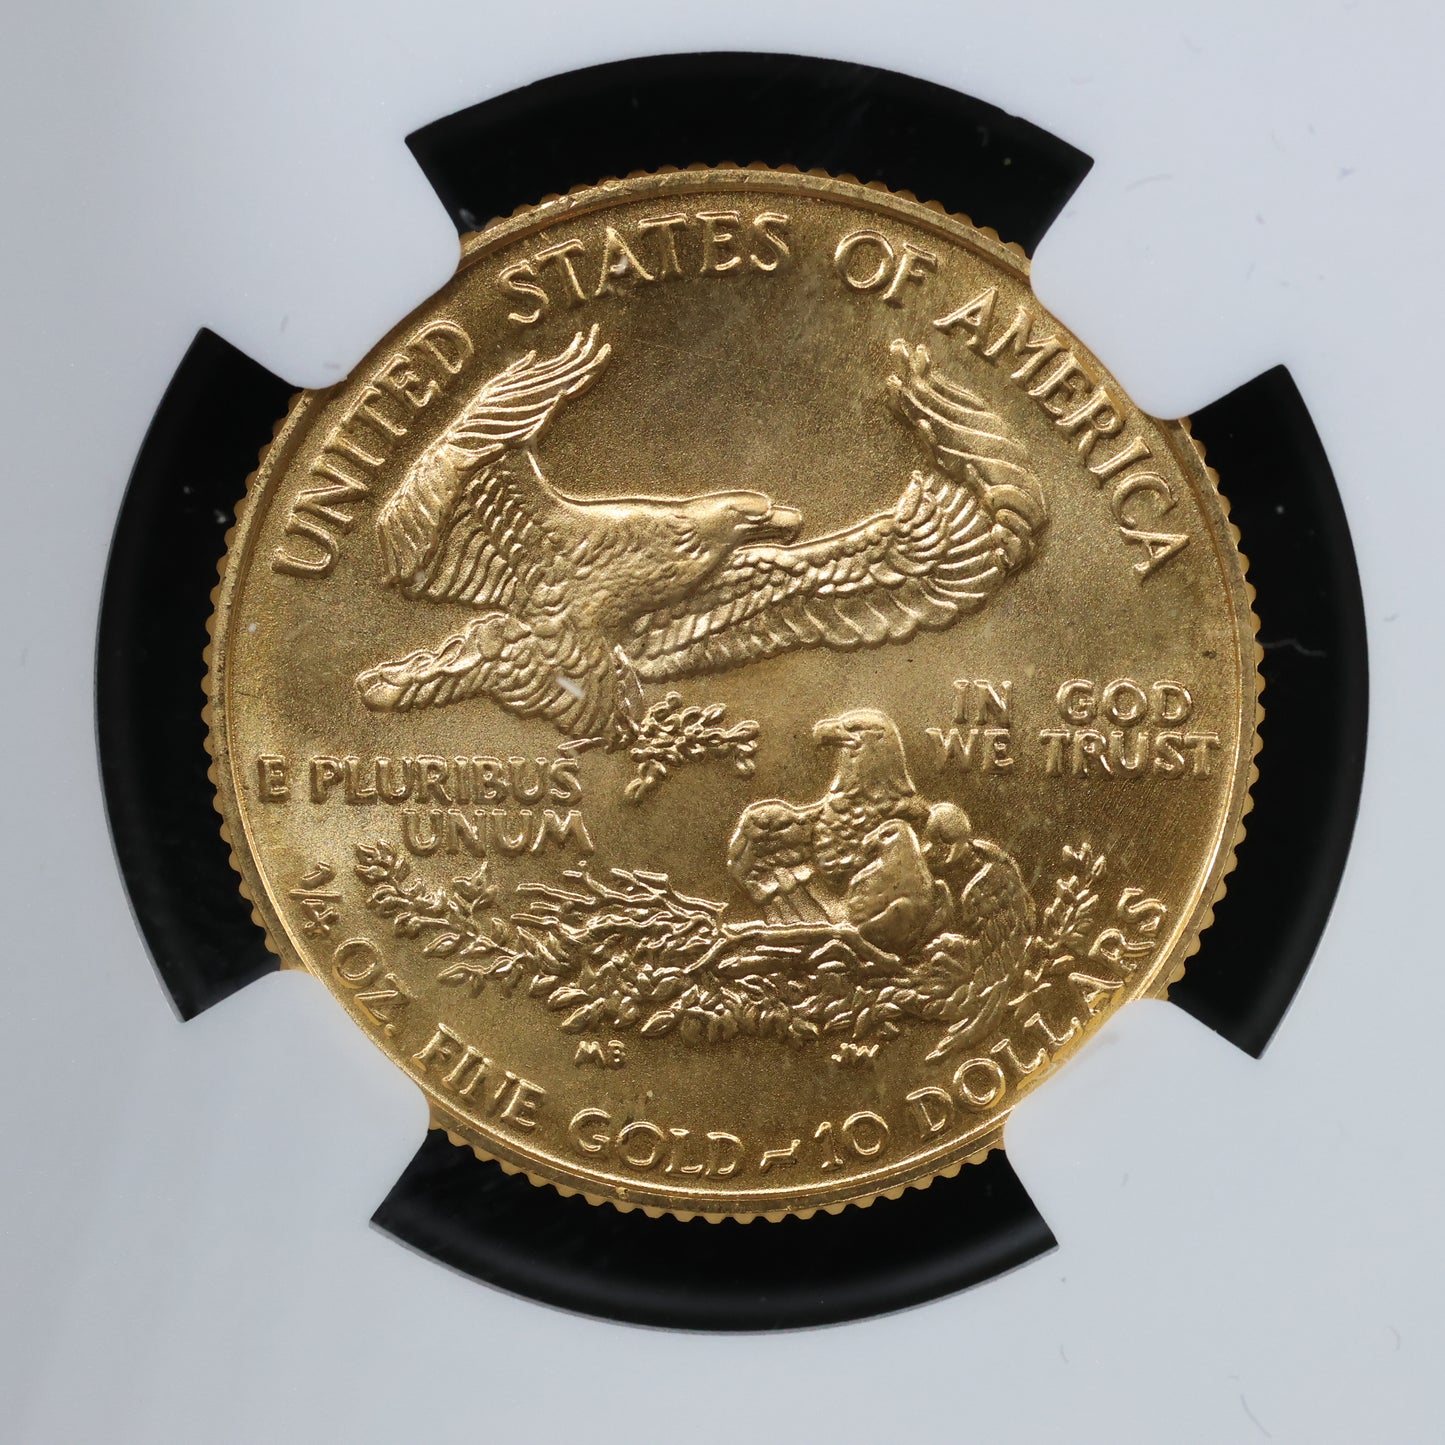 1987 1/4 oz Gold American Eagle 10$ Bullion Gold Coin - NGC MS 69